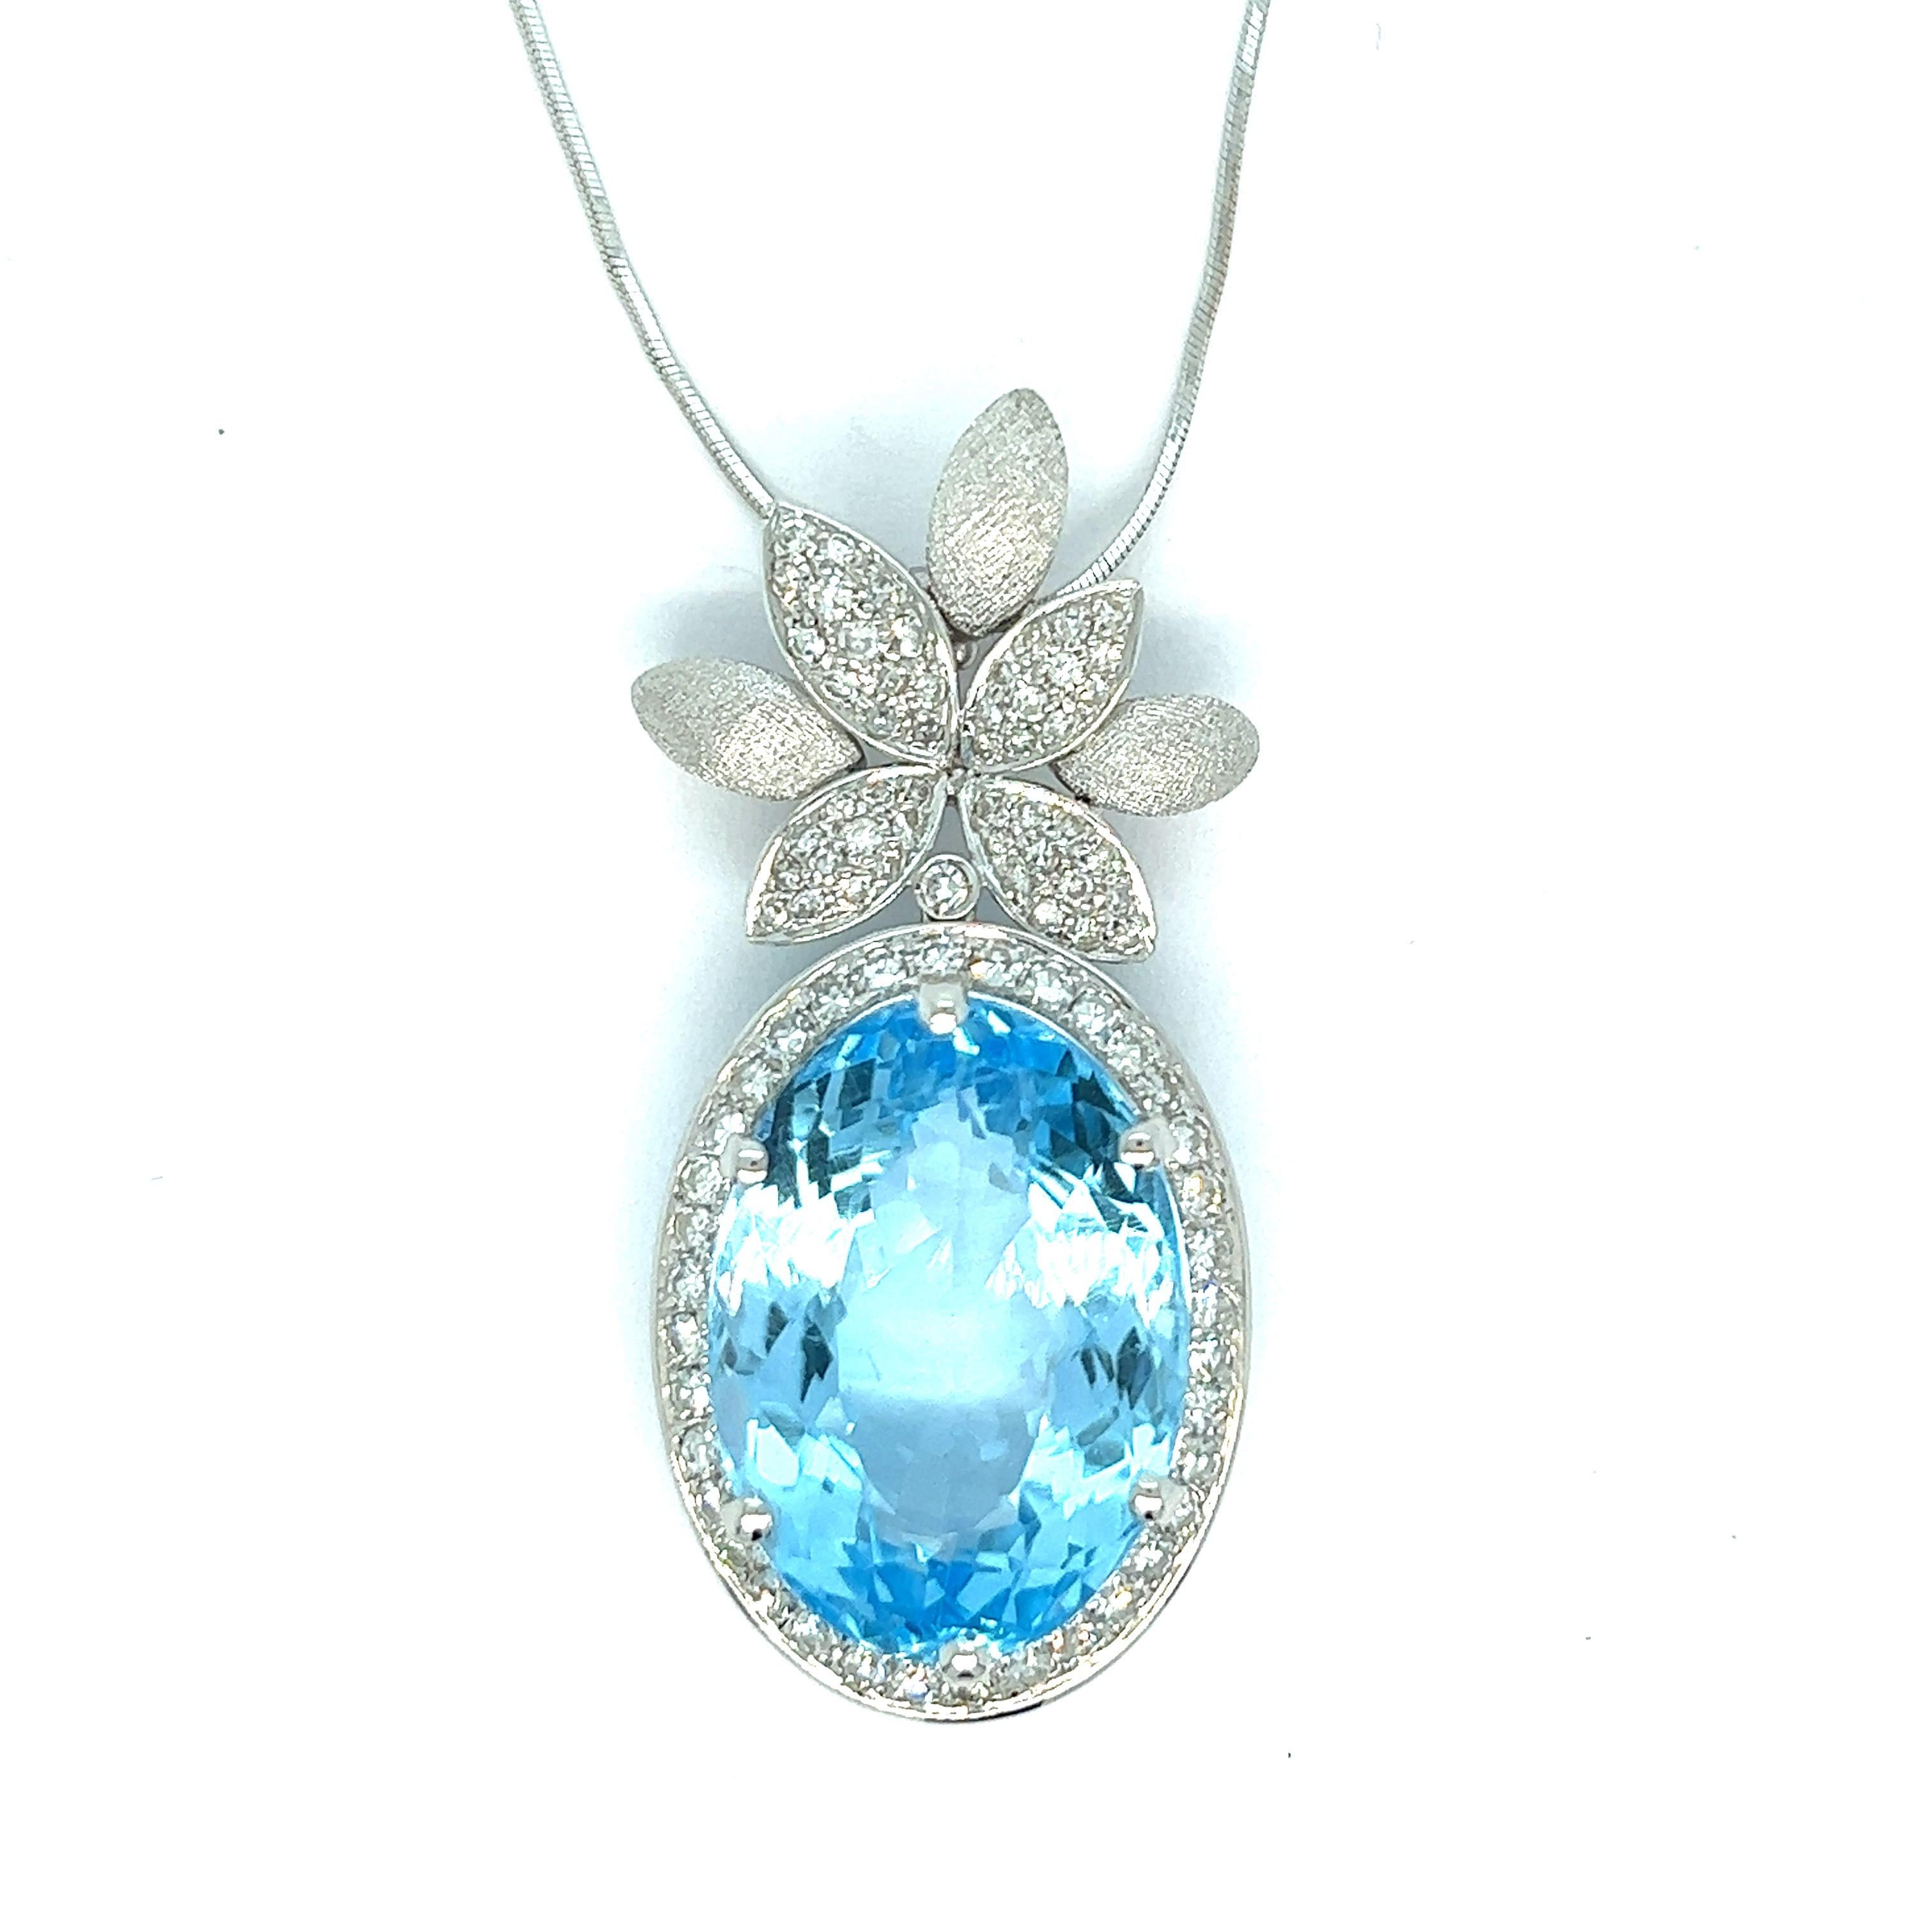 Blue topaz and diamonds pendant necklace, made in Italy

Oval shaped blue topaz of around 25-30 carats (17x23 mm), round-cut diamonds of 2 carats, 18 karat white gold; marked 750 

Size: pendant width 0.88 inch, length 2 inches; chain length 18